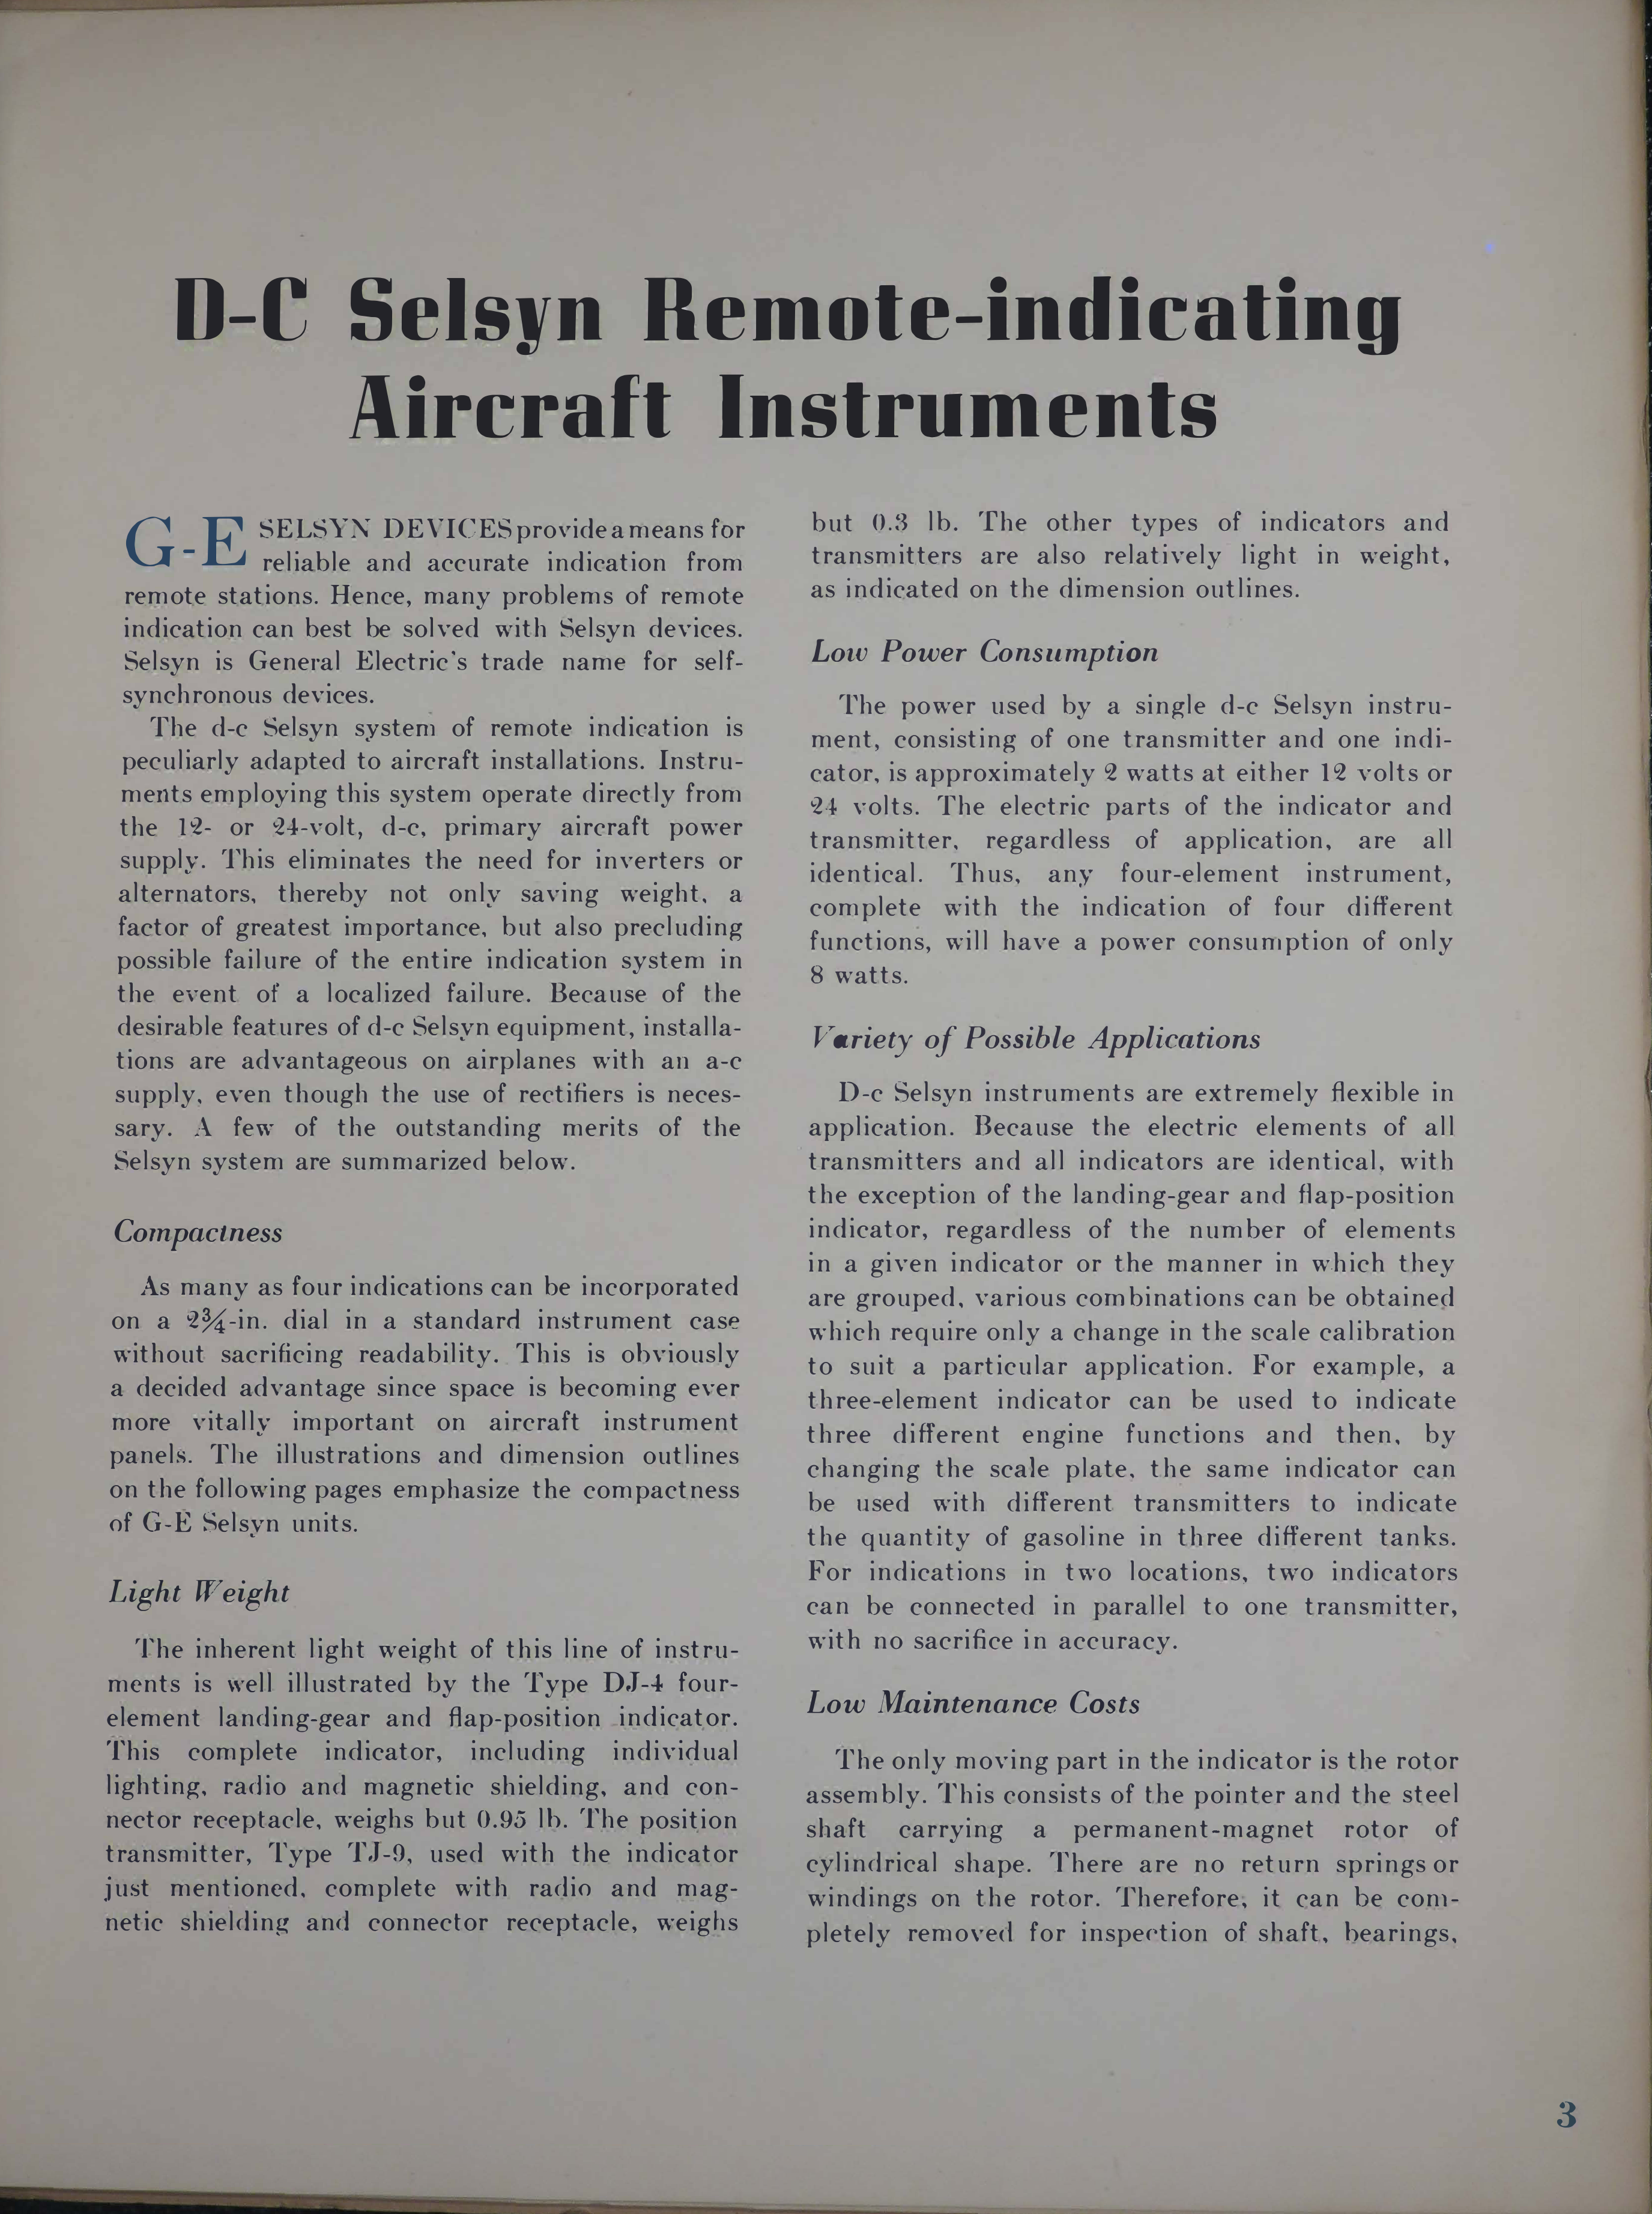 Sample page 5 from AirCorps Library document: Aircraft Instruments, Remote-Indicating D-C Selsyn System